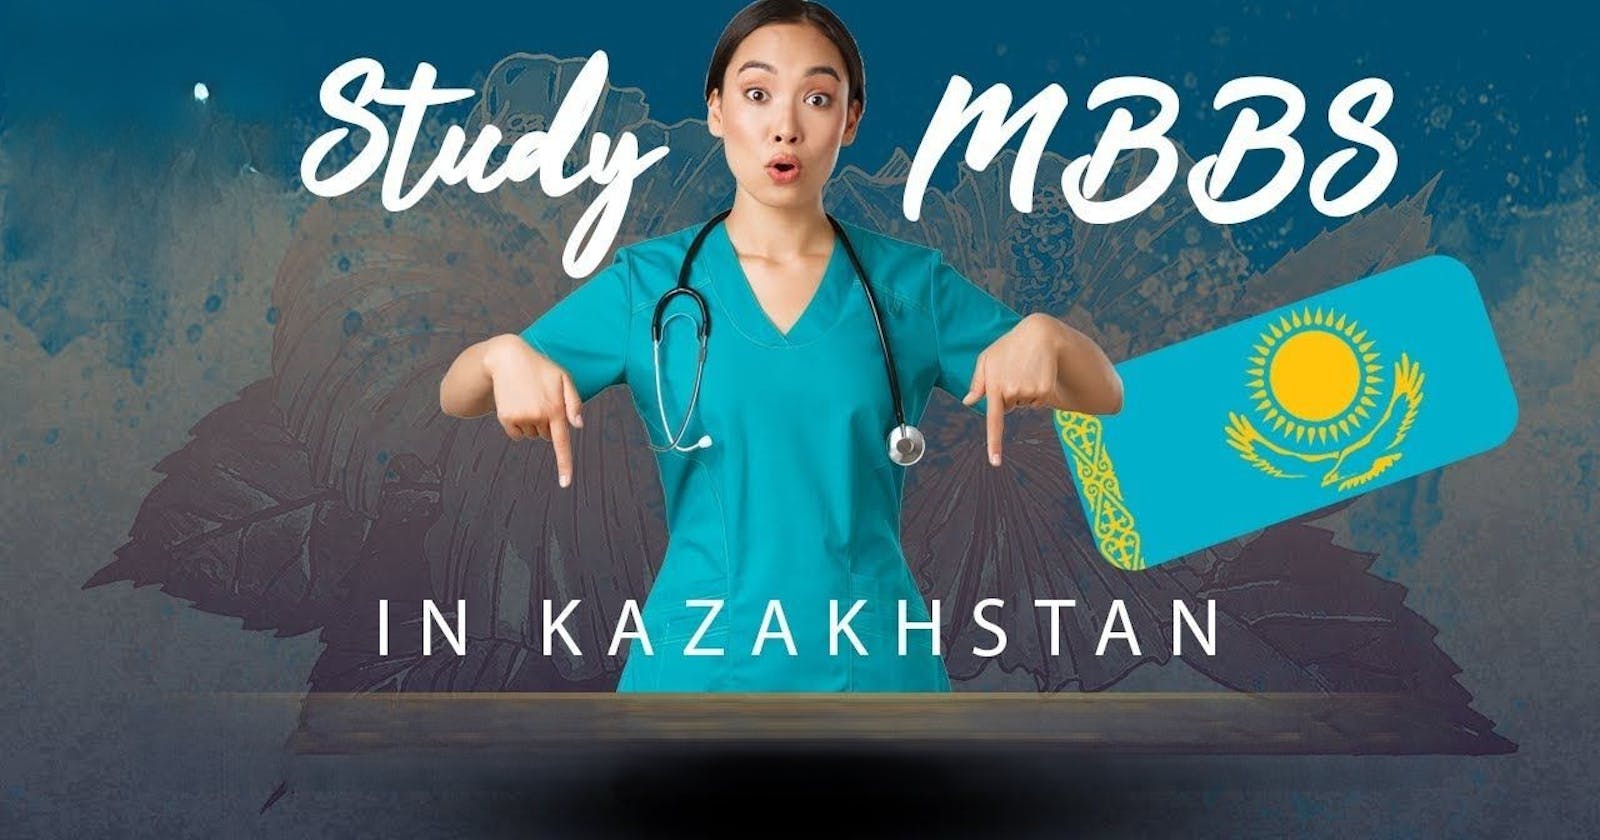 MBBS in Kazakhstan: A Wise Choice for Aspiring Medical Students